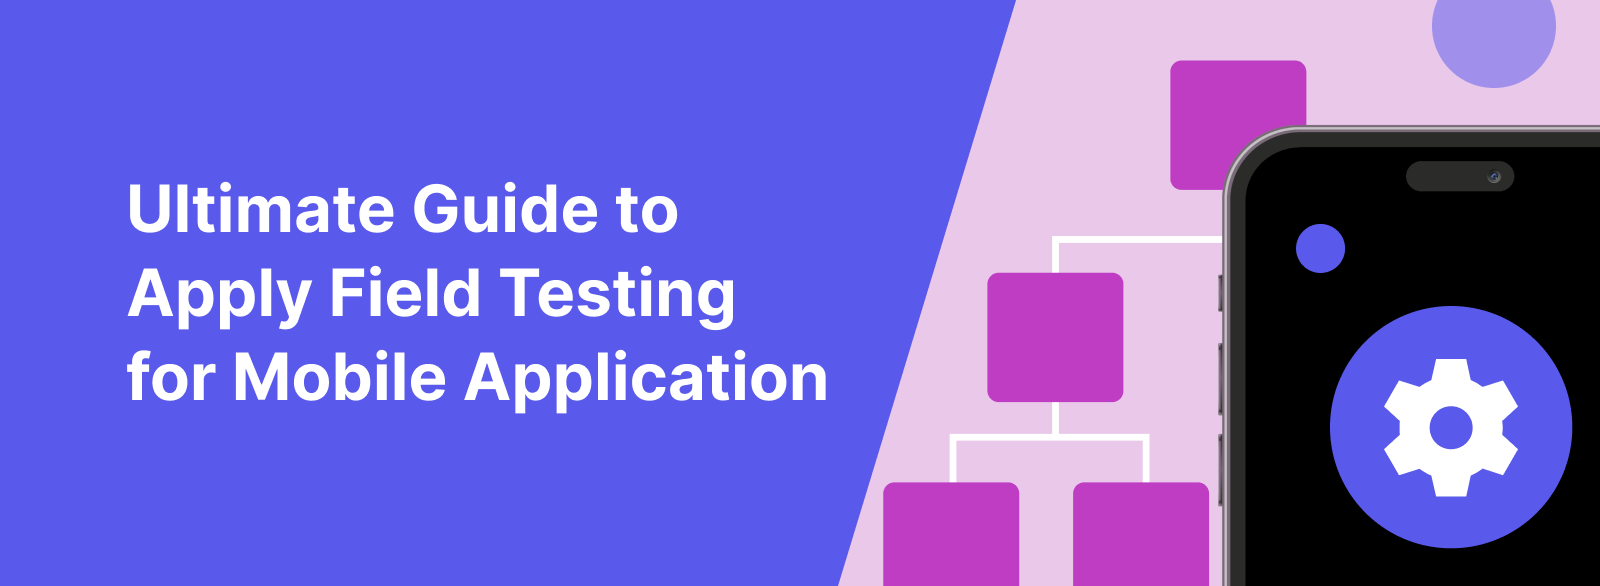 Field Testing for Mobile Applications